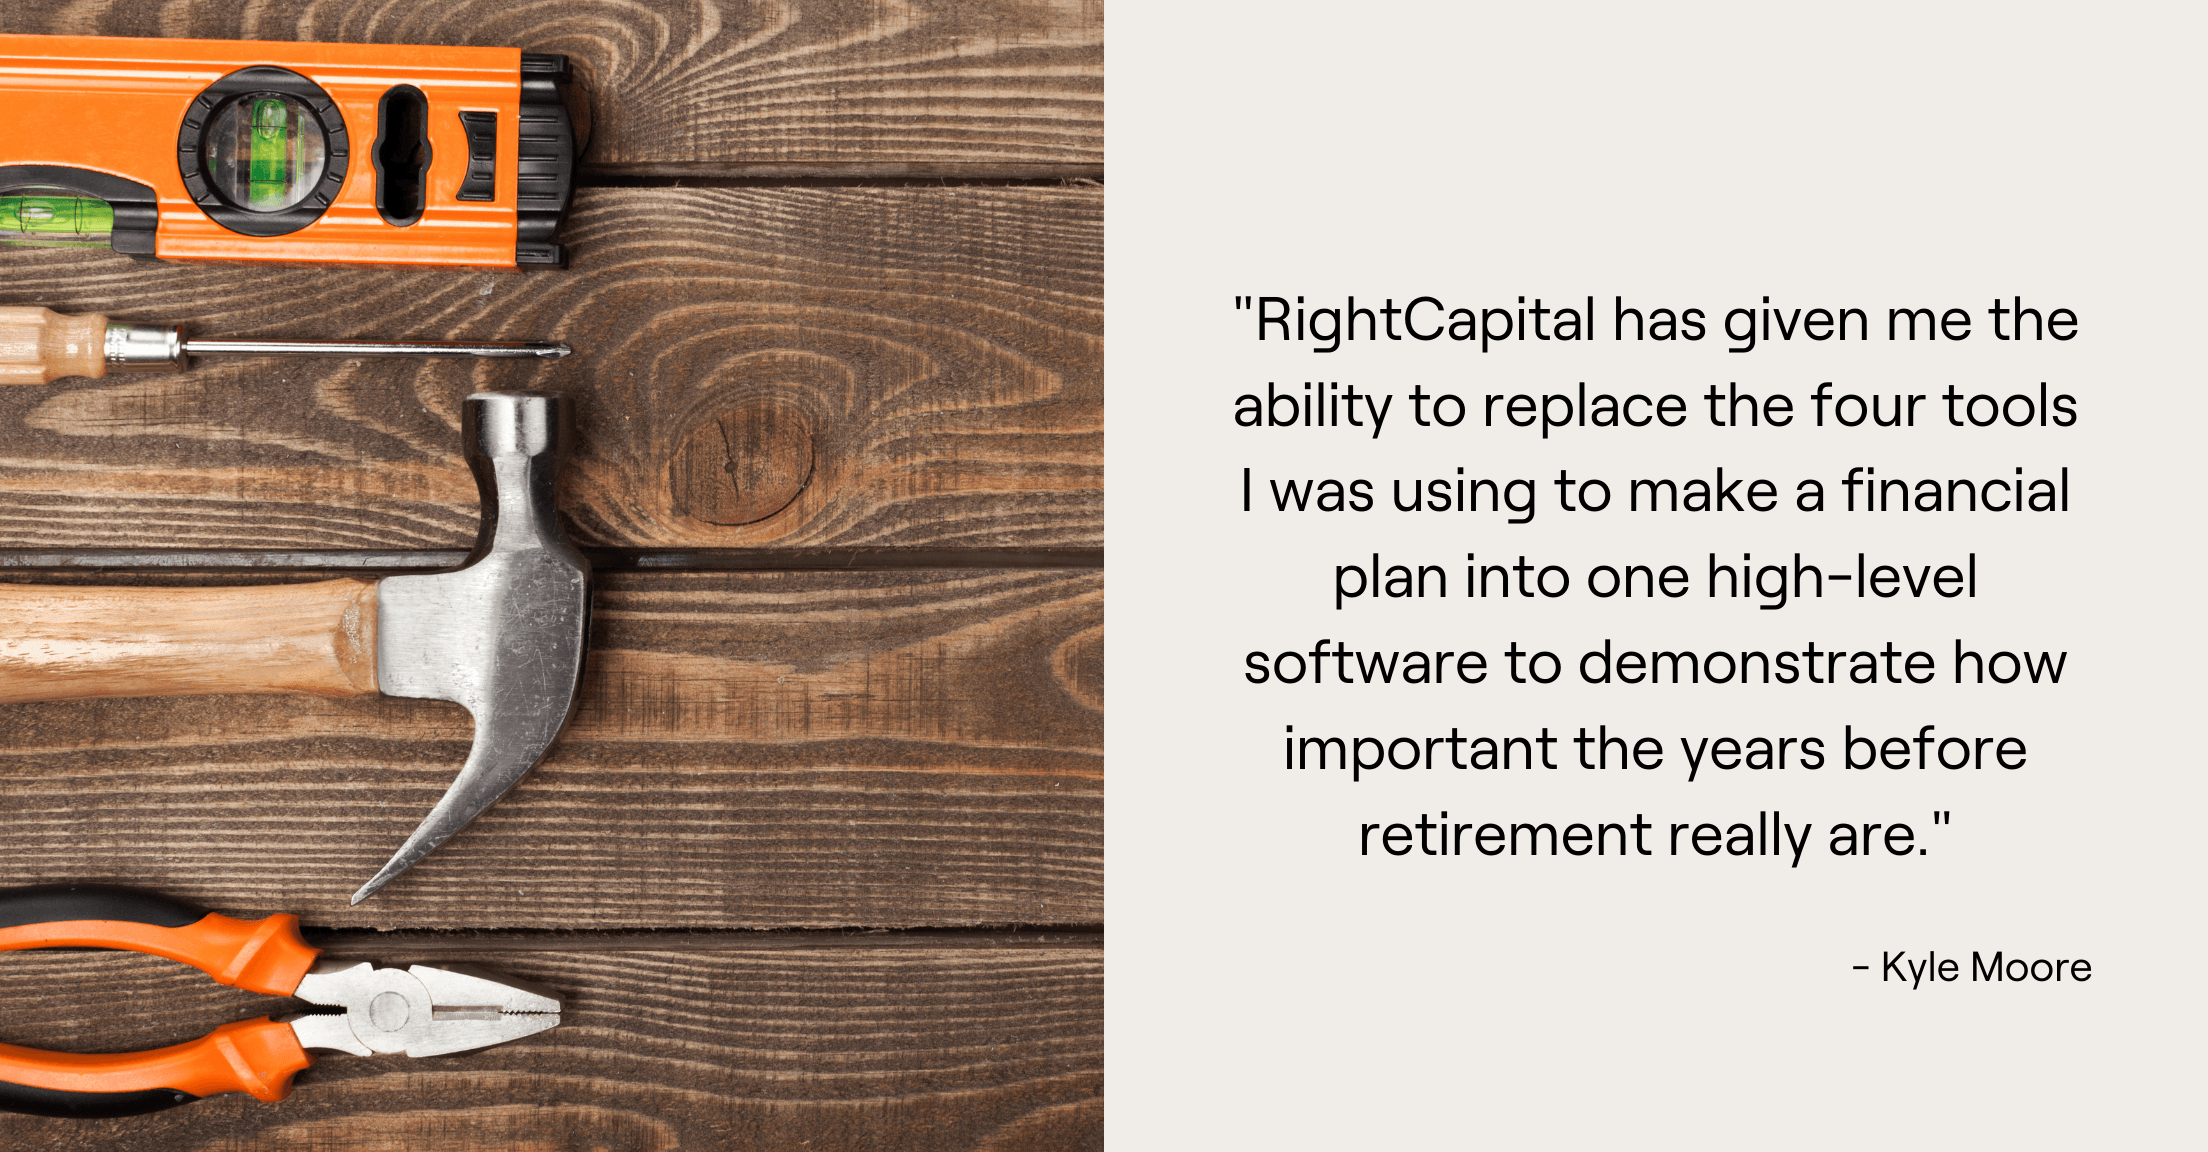 Four hardware tools and Kyle Moore quote, "RightCapital has given me the ability to replace the four tools I was using to make a financial plan into one high-level software to demonstrate how important the years before retirement really are."